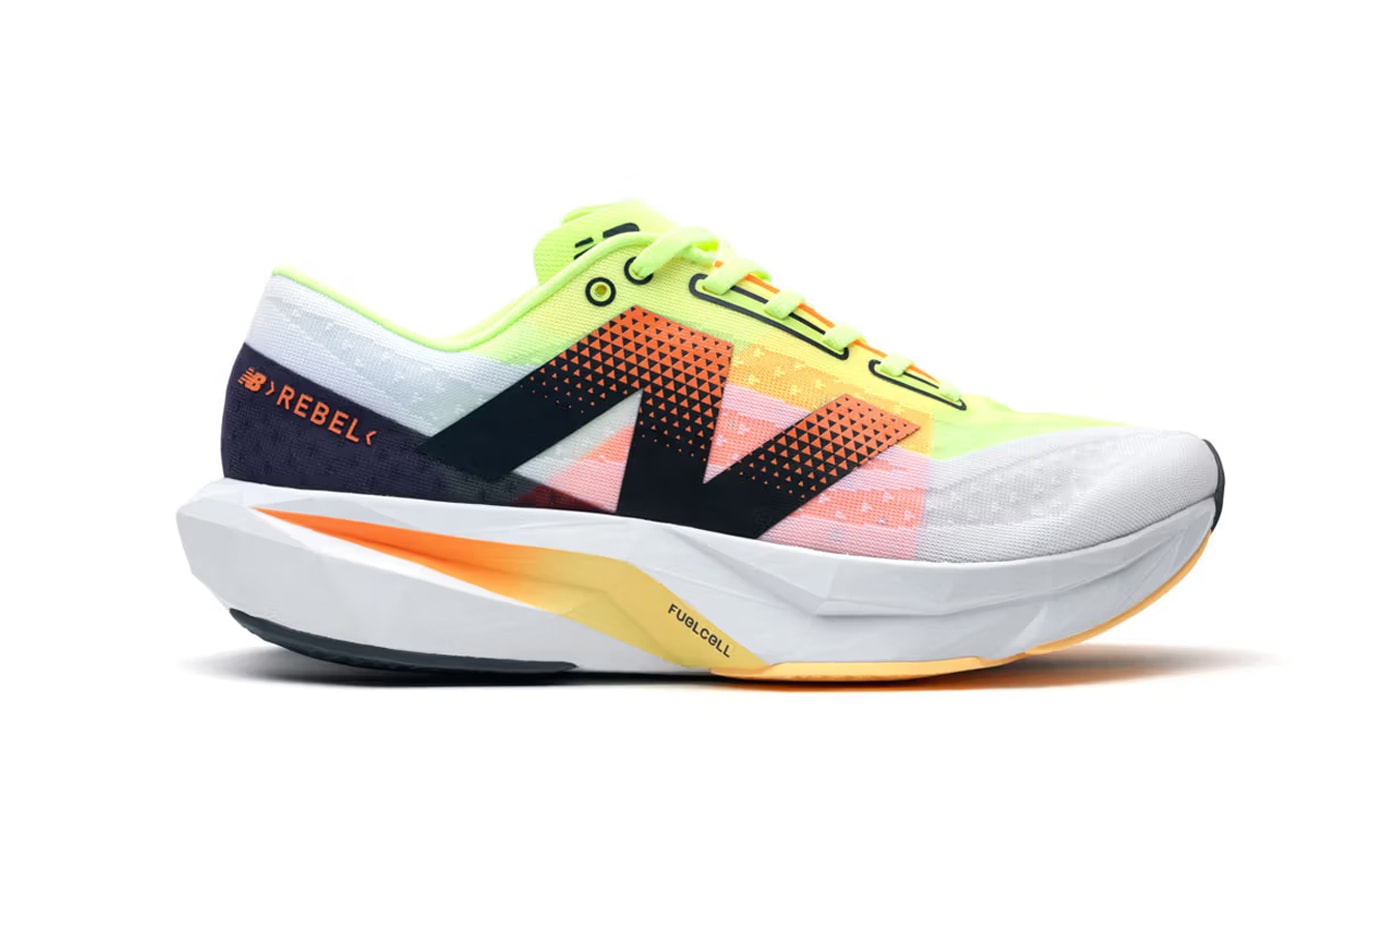 New Balance Introduces FuelCell Rebel v4 Footwear